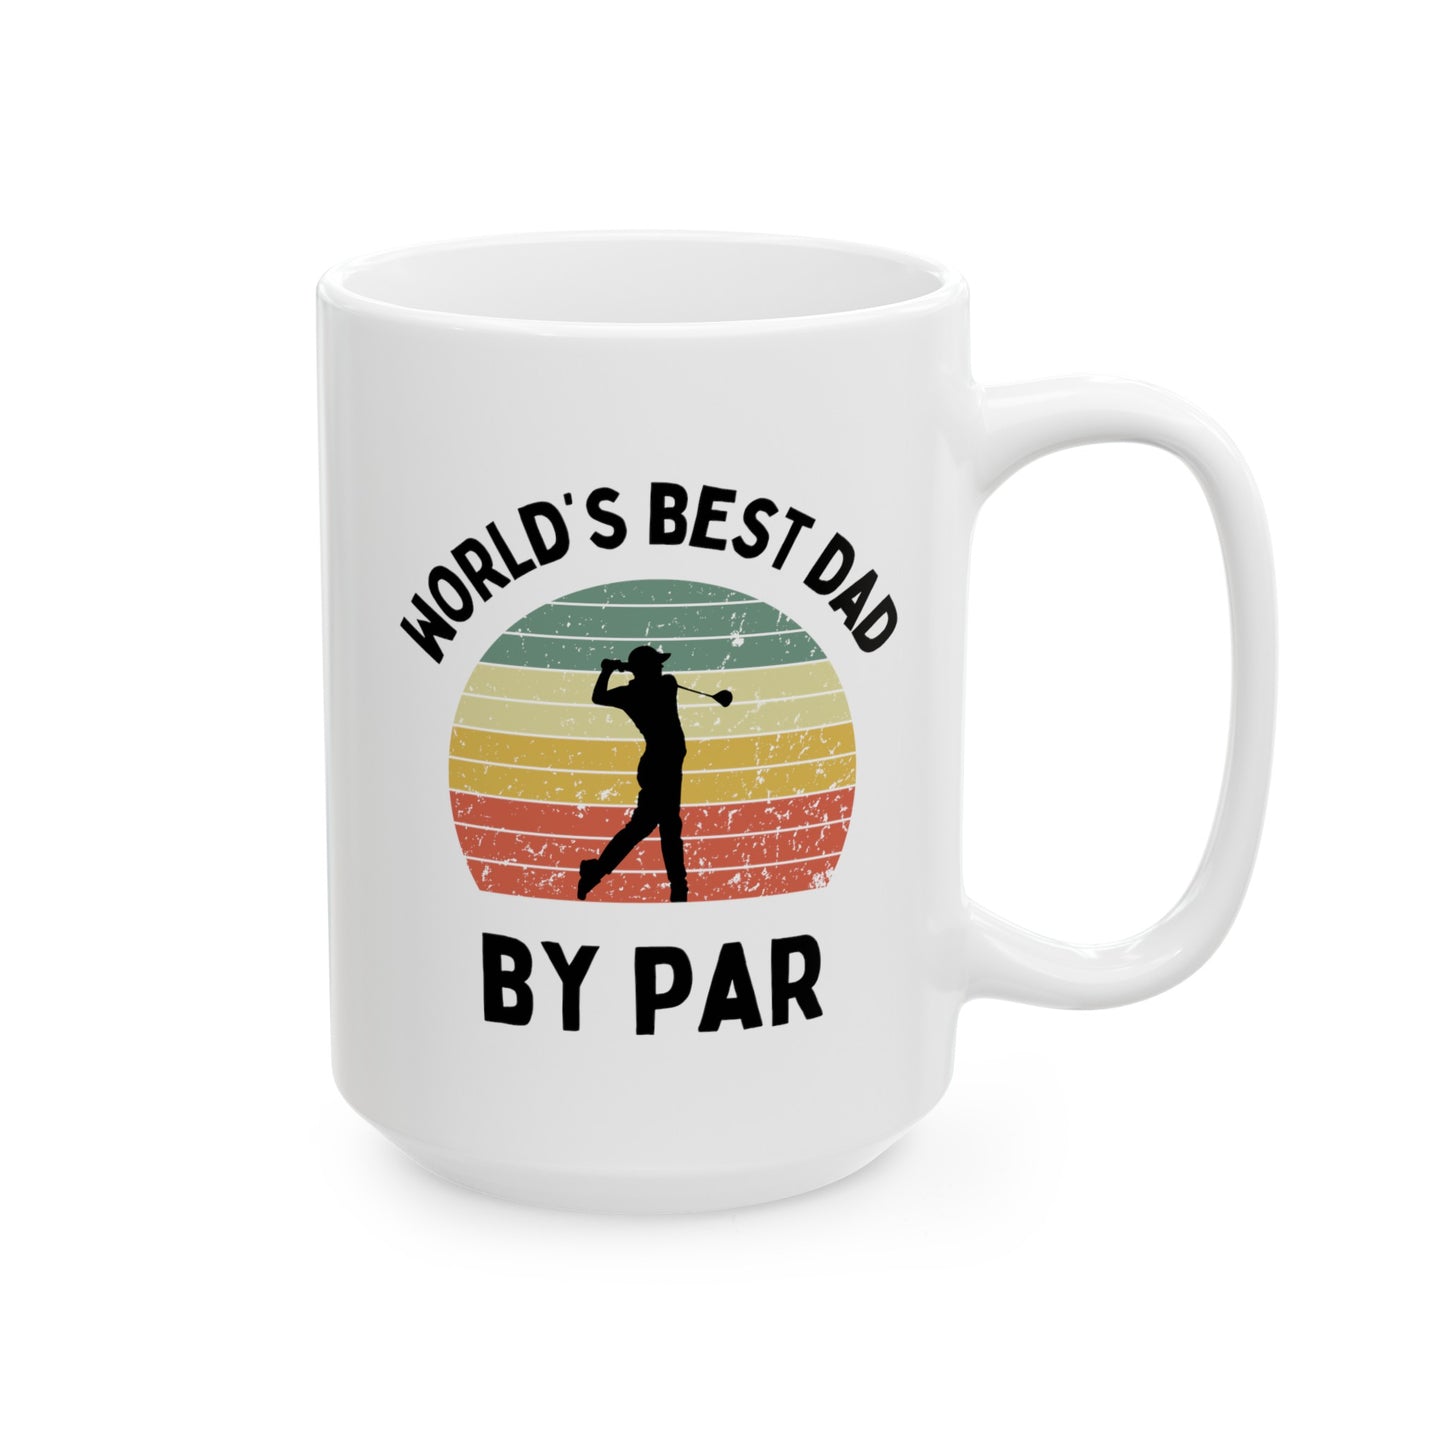 World's Best Dad By Par 15oz white funny large big coffee mug tea cup gift for him golfer vintage sunset golf men him pops father's day birthday christmas waveywares wavey wares wavywares wavy wares